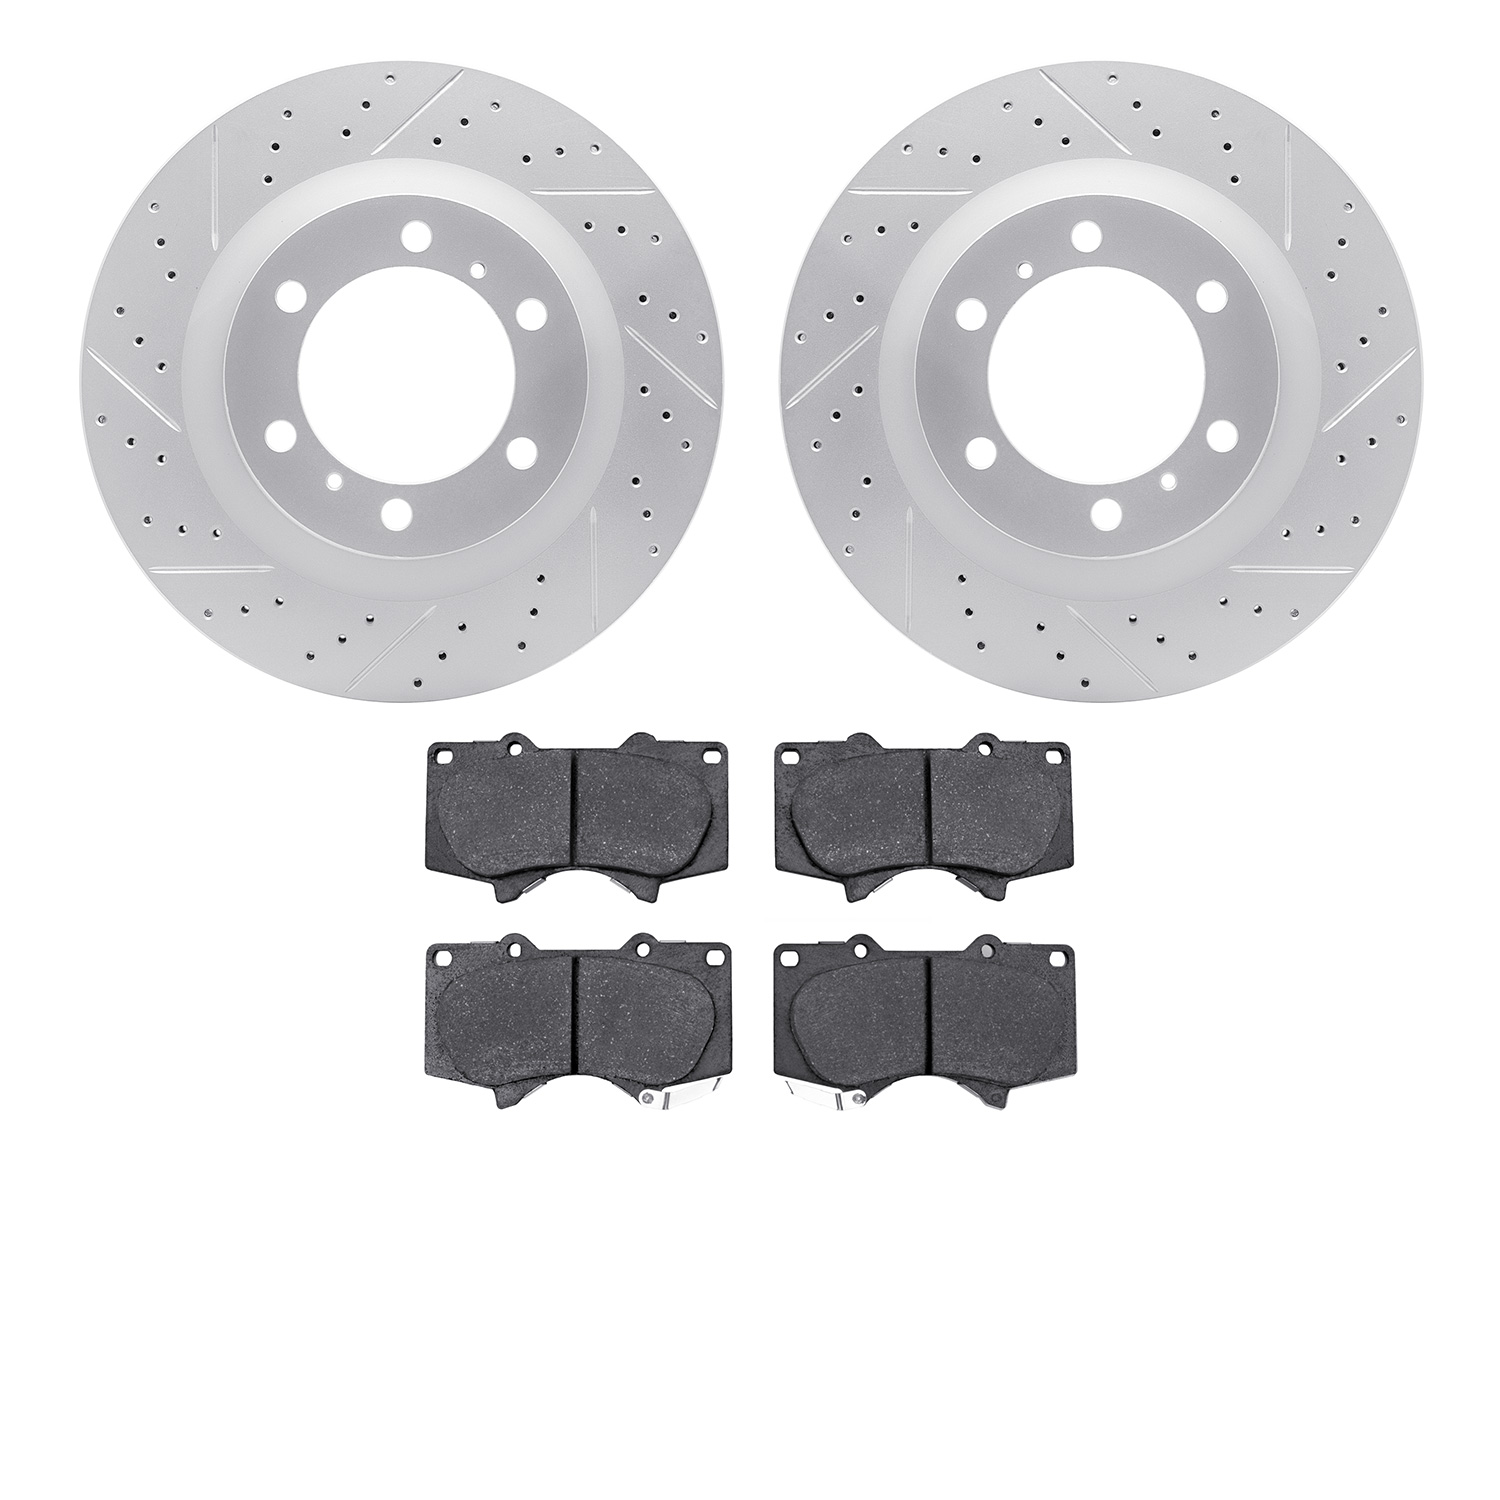 2202-76008 Geoperformance Drilled/Slotted Rotors w/Heavy-Duty Pads Kit, Fits Select Lexus/Toyota/Scion, Position: Front